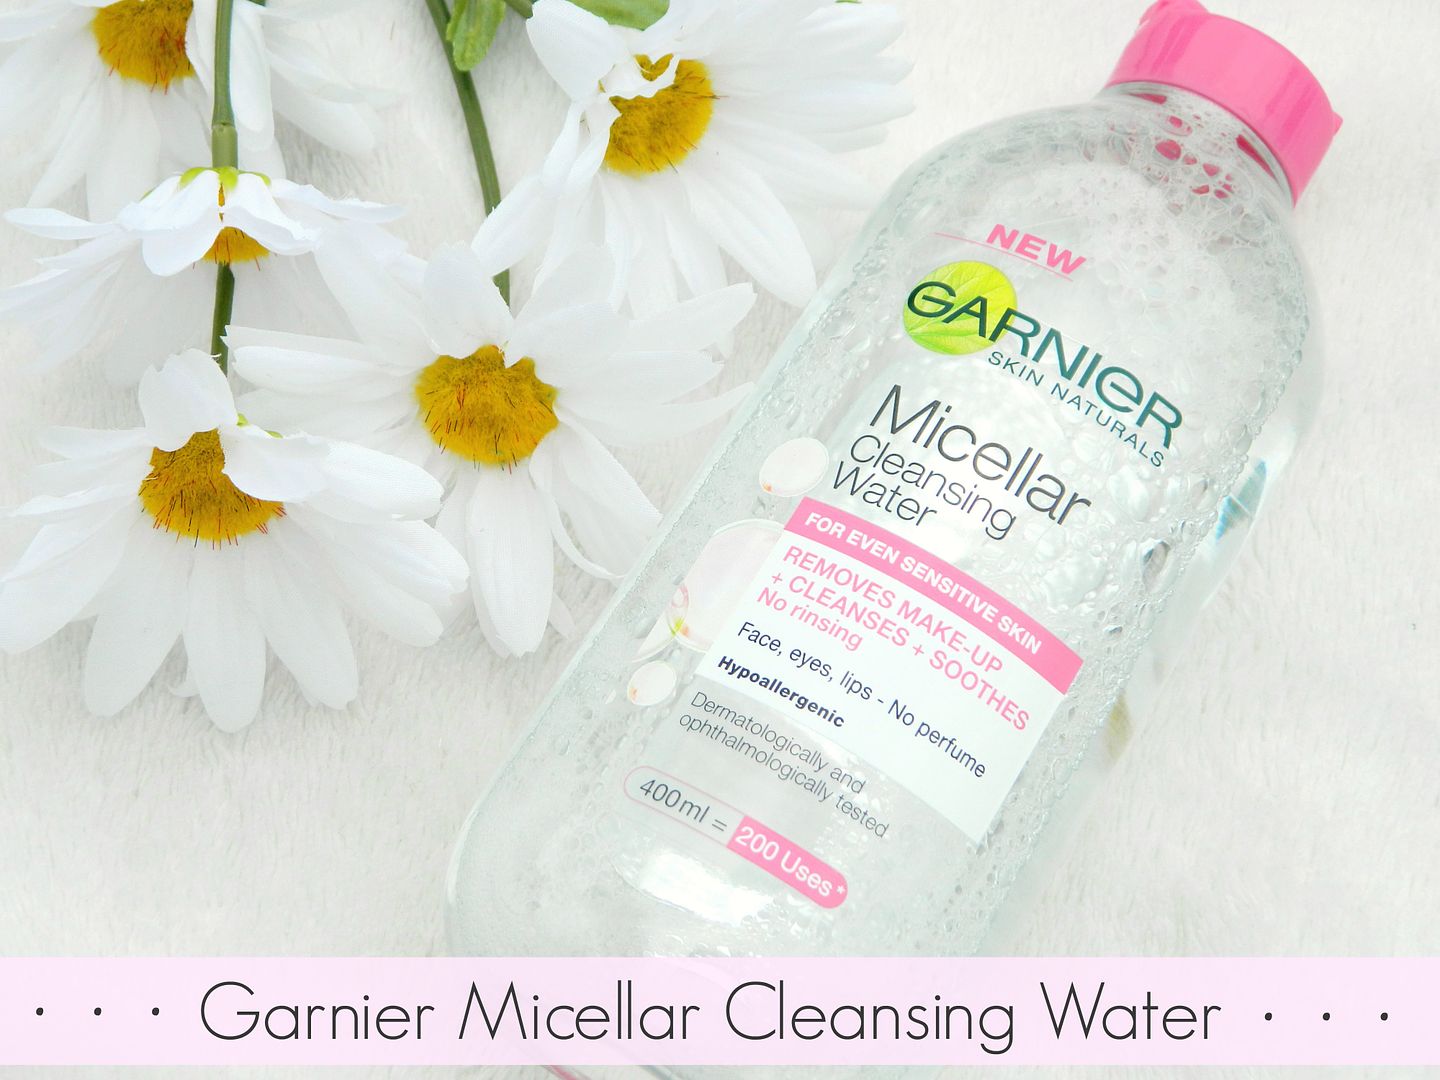 Daily Favourites Garnier Micellar Cleansing Water Review Belle-Amie UK Beauty Fashion Lifestyle Blog